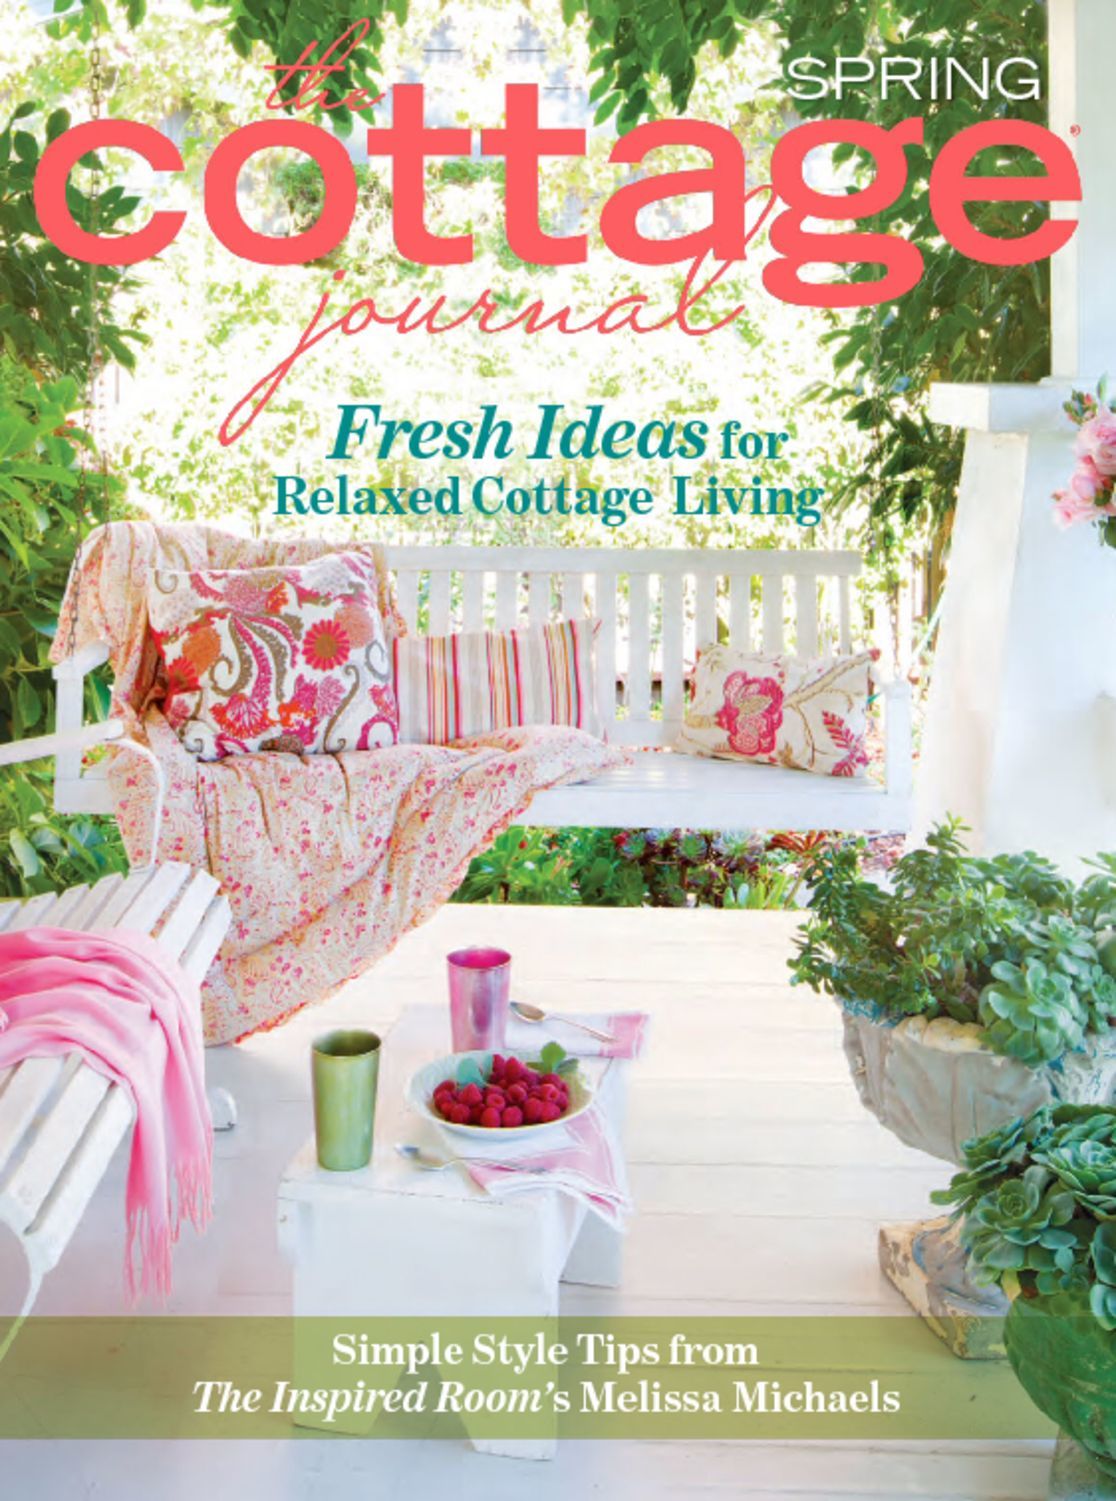 59410 The Cottage Journal Digital Cover 2018 February 1 Issue 